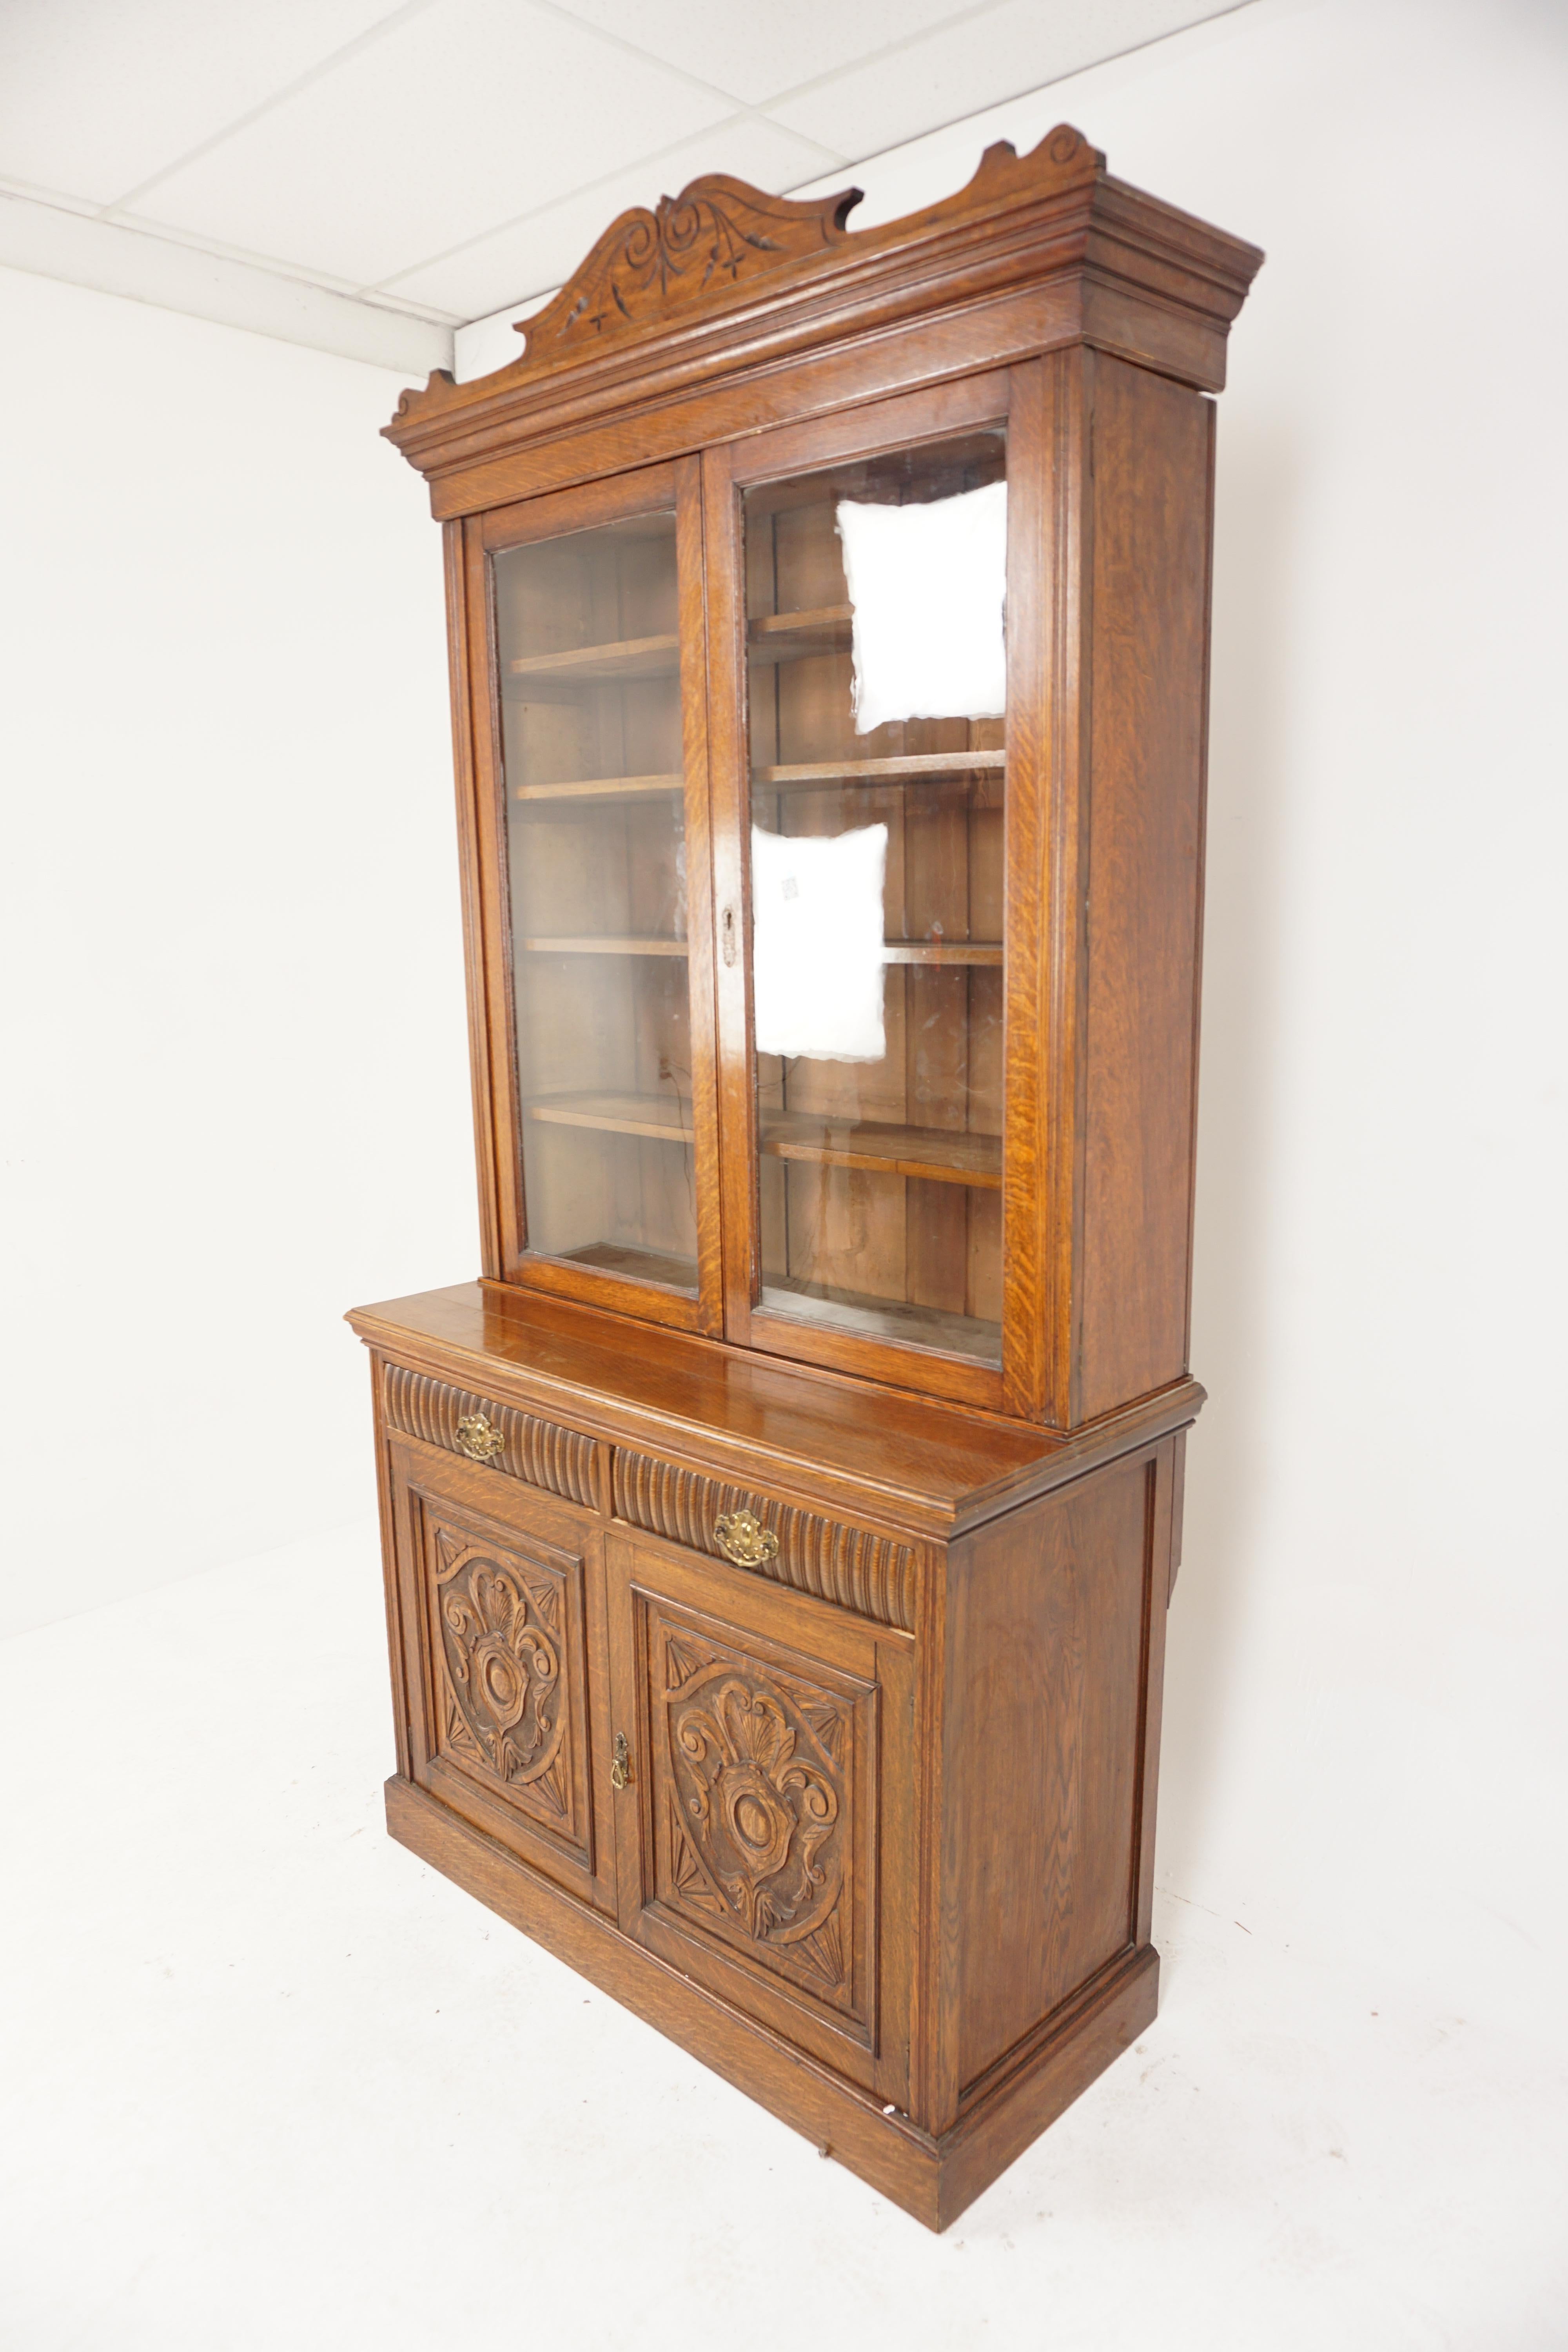 Antique Victorian Carved Tiger Oak cabinet bookcase, display cabinet, Scotland 1900, H876


Scotland 1900
Solid Oak
Original Finish

Carved pediment with large flared out cornice on top
Pair of original glass doors
Open to reveal 4